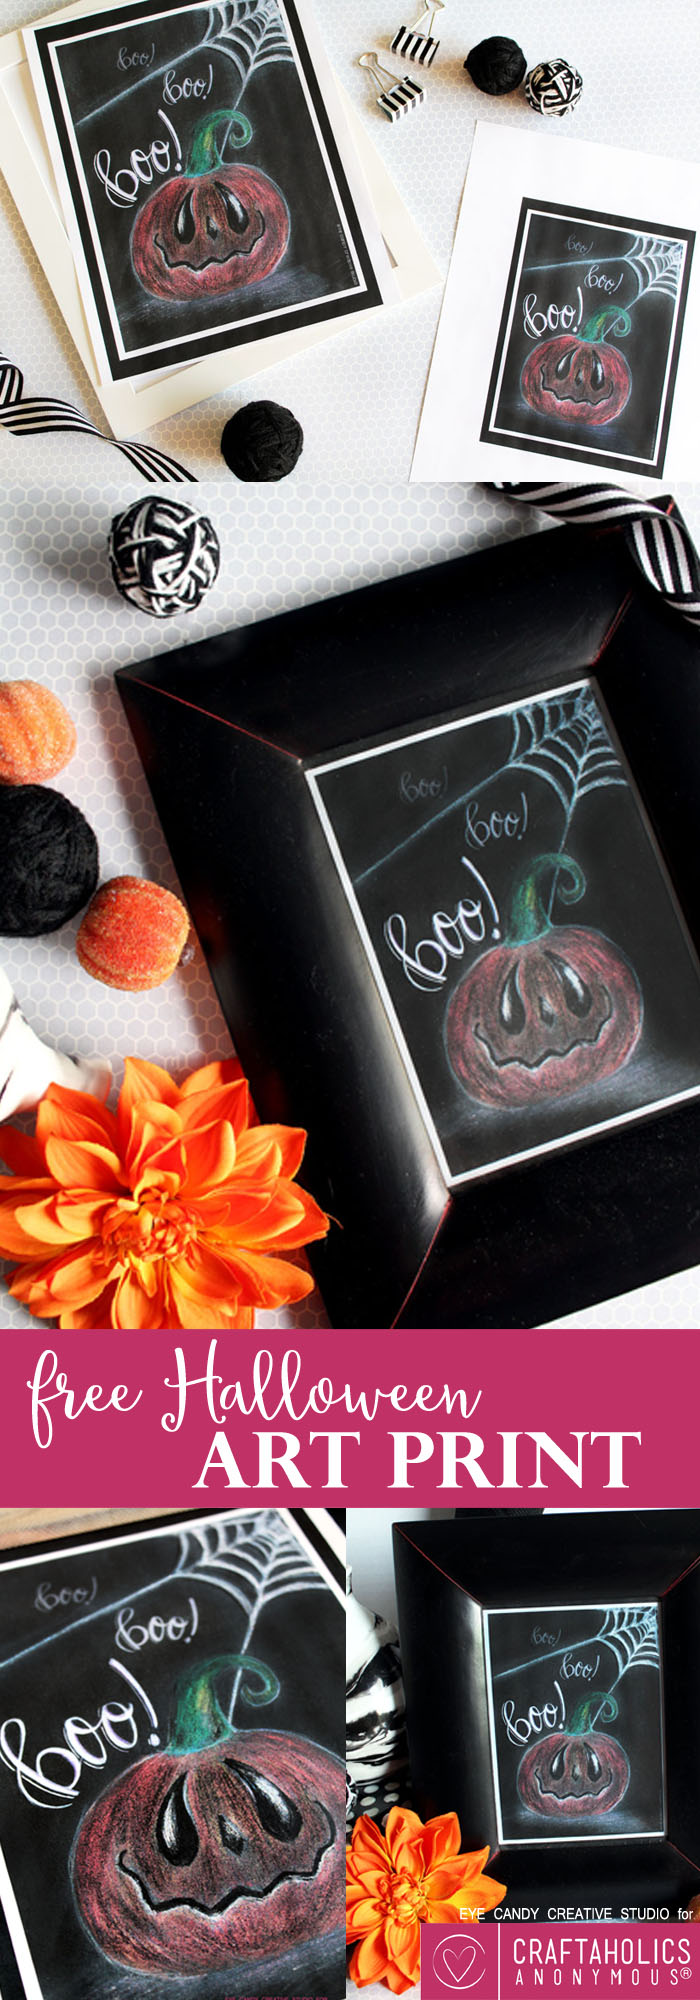 Download this free halloween chalk art print for your ghoulish gallery wall! Add to your Halloween decor with this free printable! 